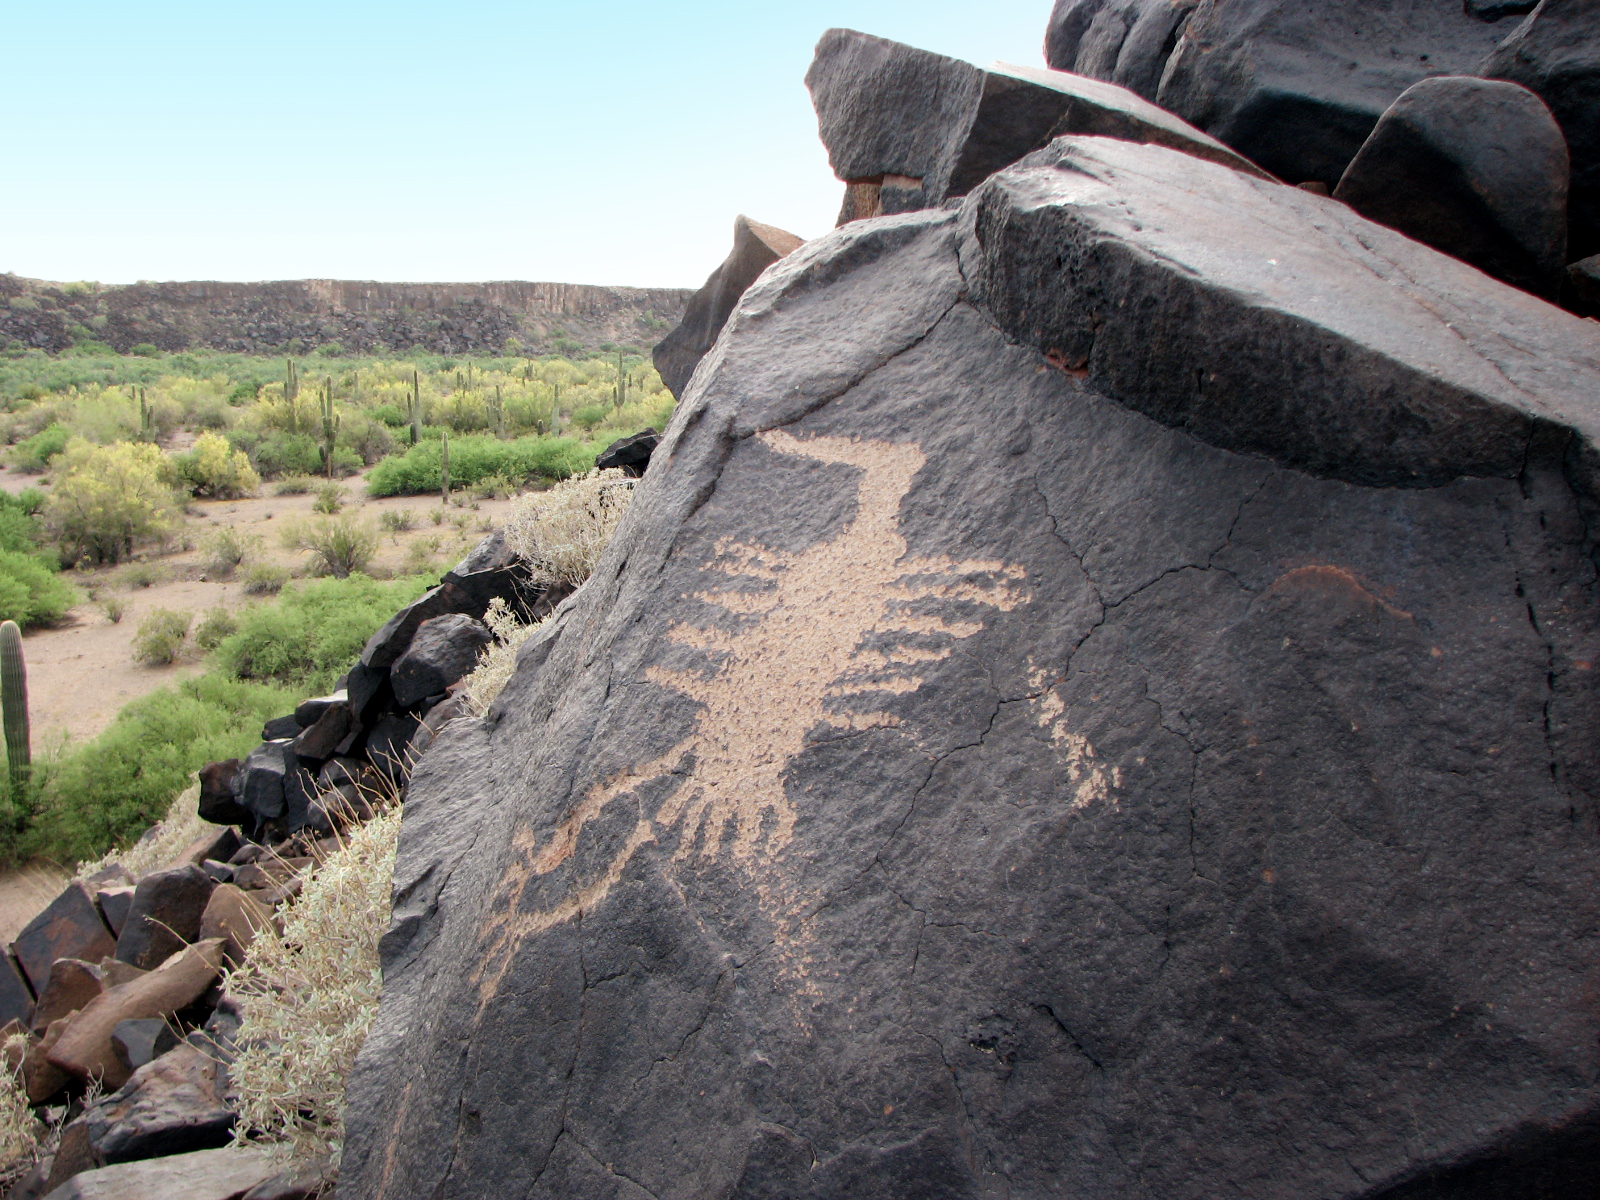 Patayan petroglyph from the lower Gila River. Photo by Allen Gill